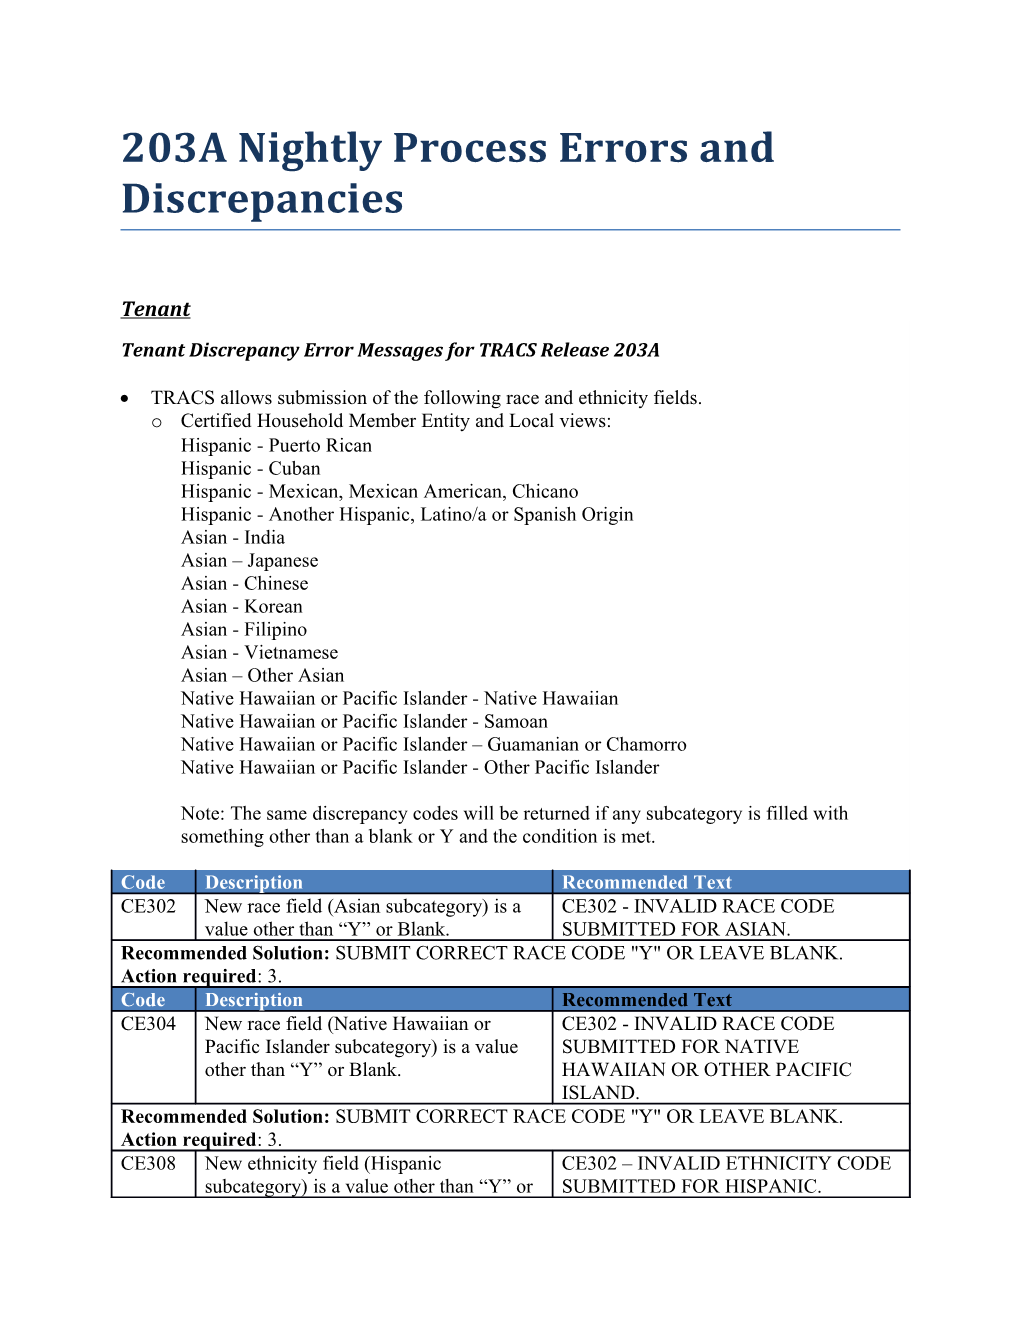 Tenant Discrepancy Error Messages for TRACS Release 203A